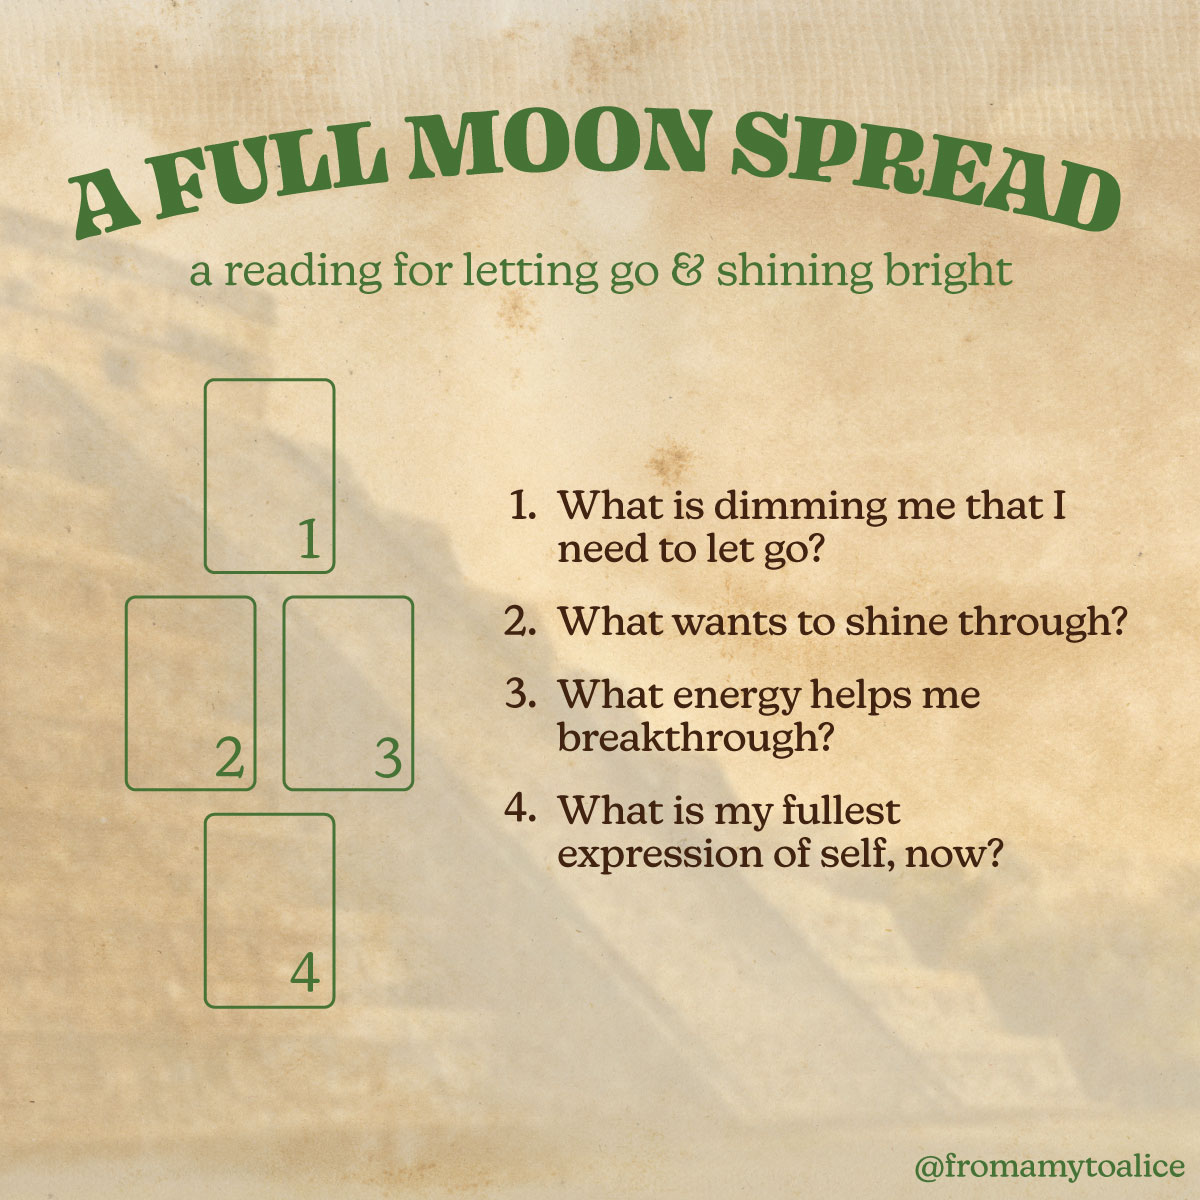 A full moon spread for letting go and shining bright.<br />
1. What is dimming me that I need to let go?<br />
2. What wants to shine through?<br />
3. What energy helps me breakthrough?<br />
4. What is my fullest expression of self, now?